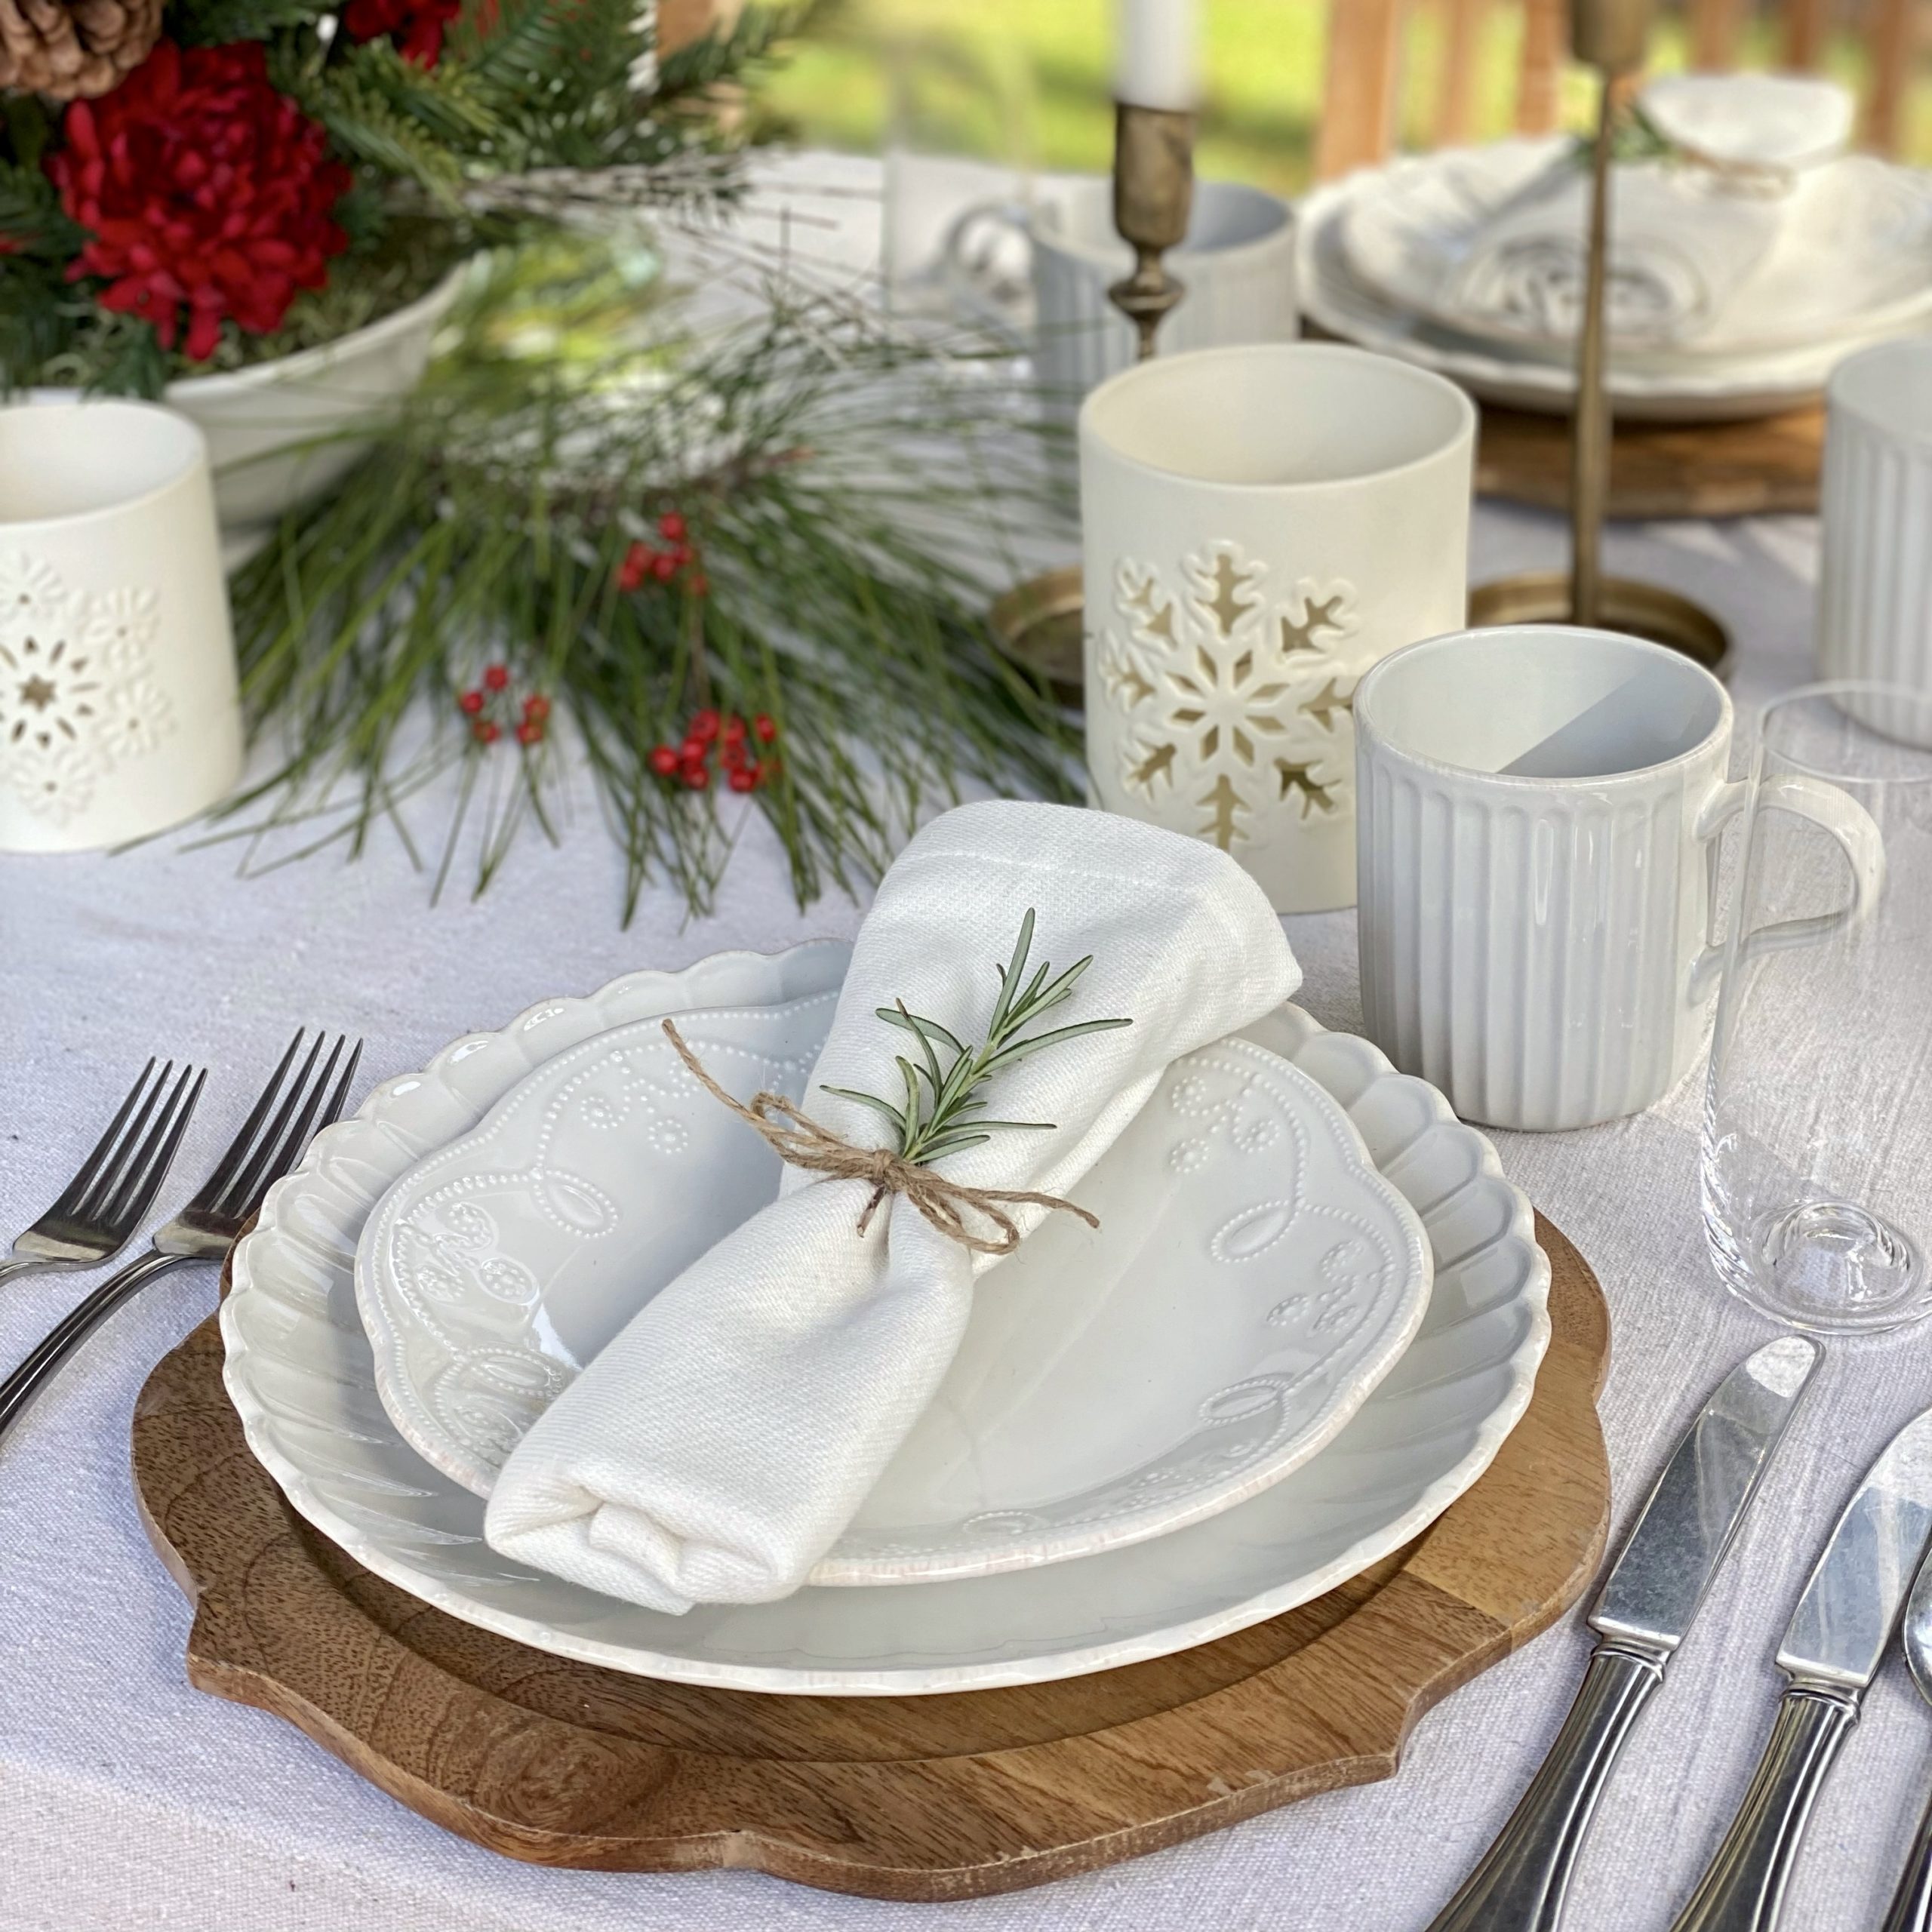 Christmas table seeing featuring Lenox dishes and candle holders.